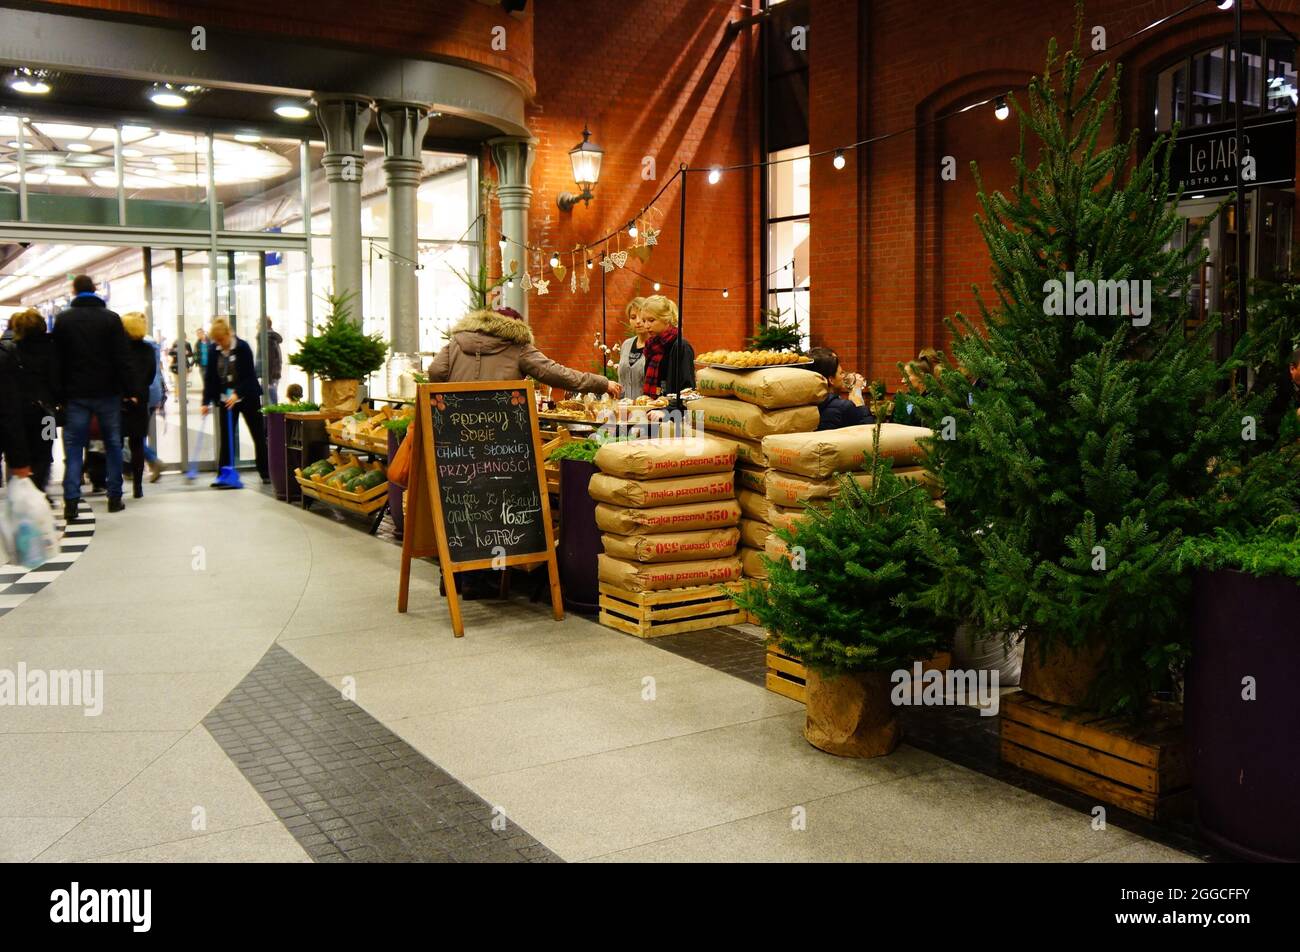 POZNAN, POLAND - Dec 14, 2014: A female selling fresh bread behind a stand next to trees in the Stary Browar shopping mall Stock Photo